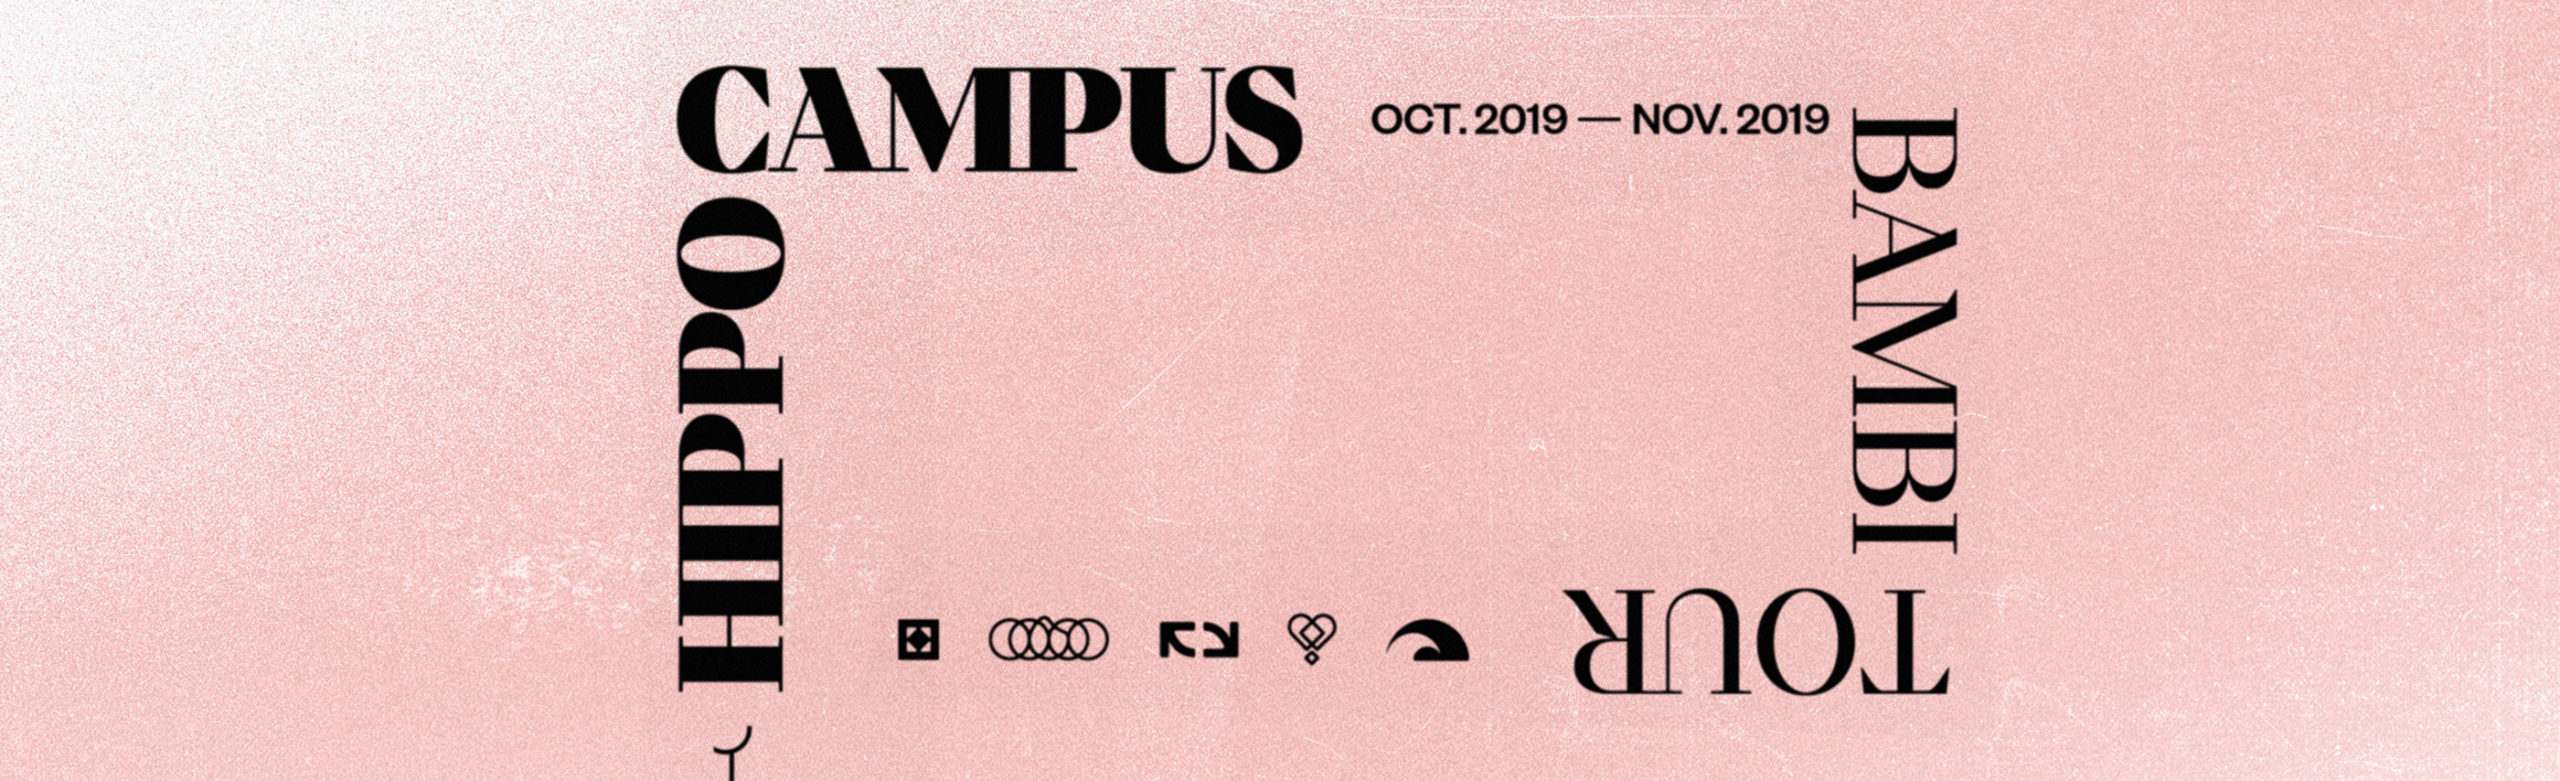 Hippo Campus Tickets + T-Shirt & Vinyl Giveaway Image